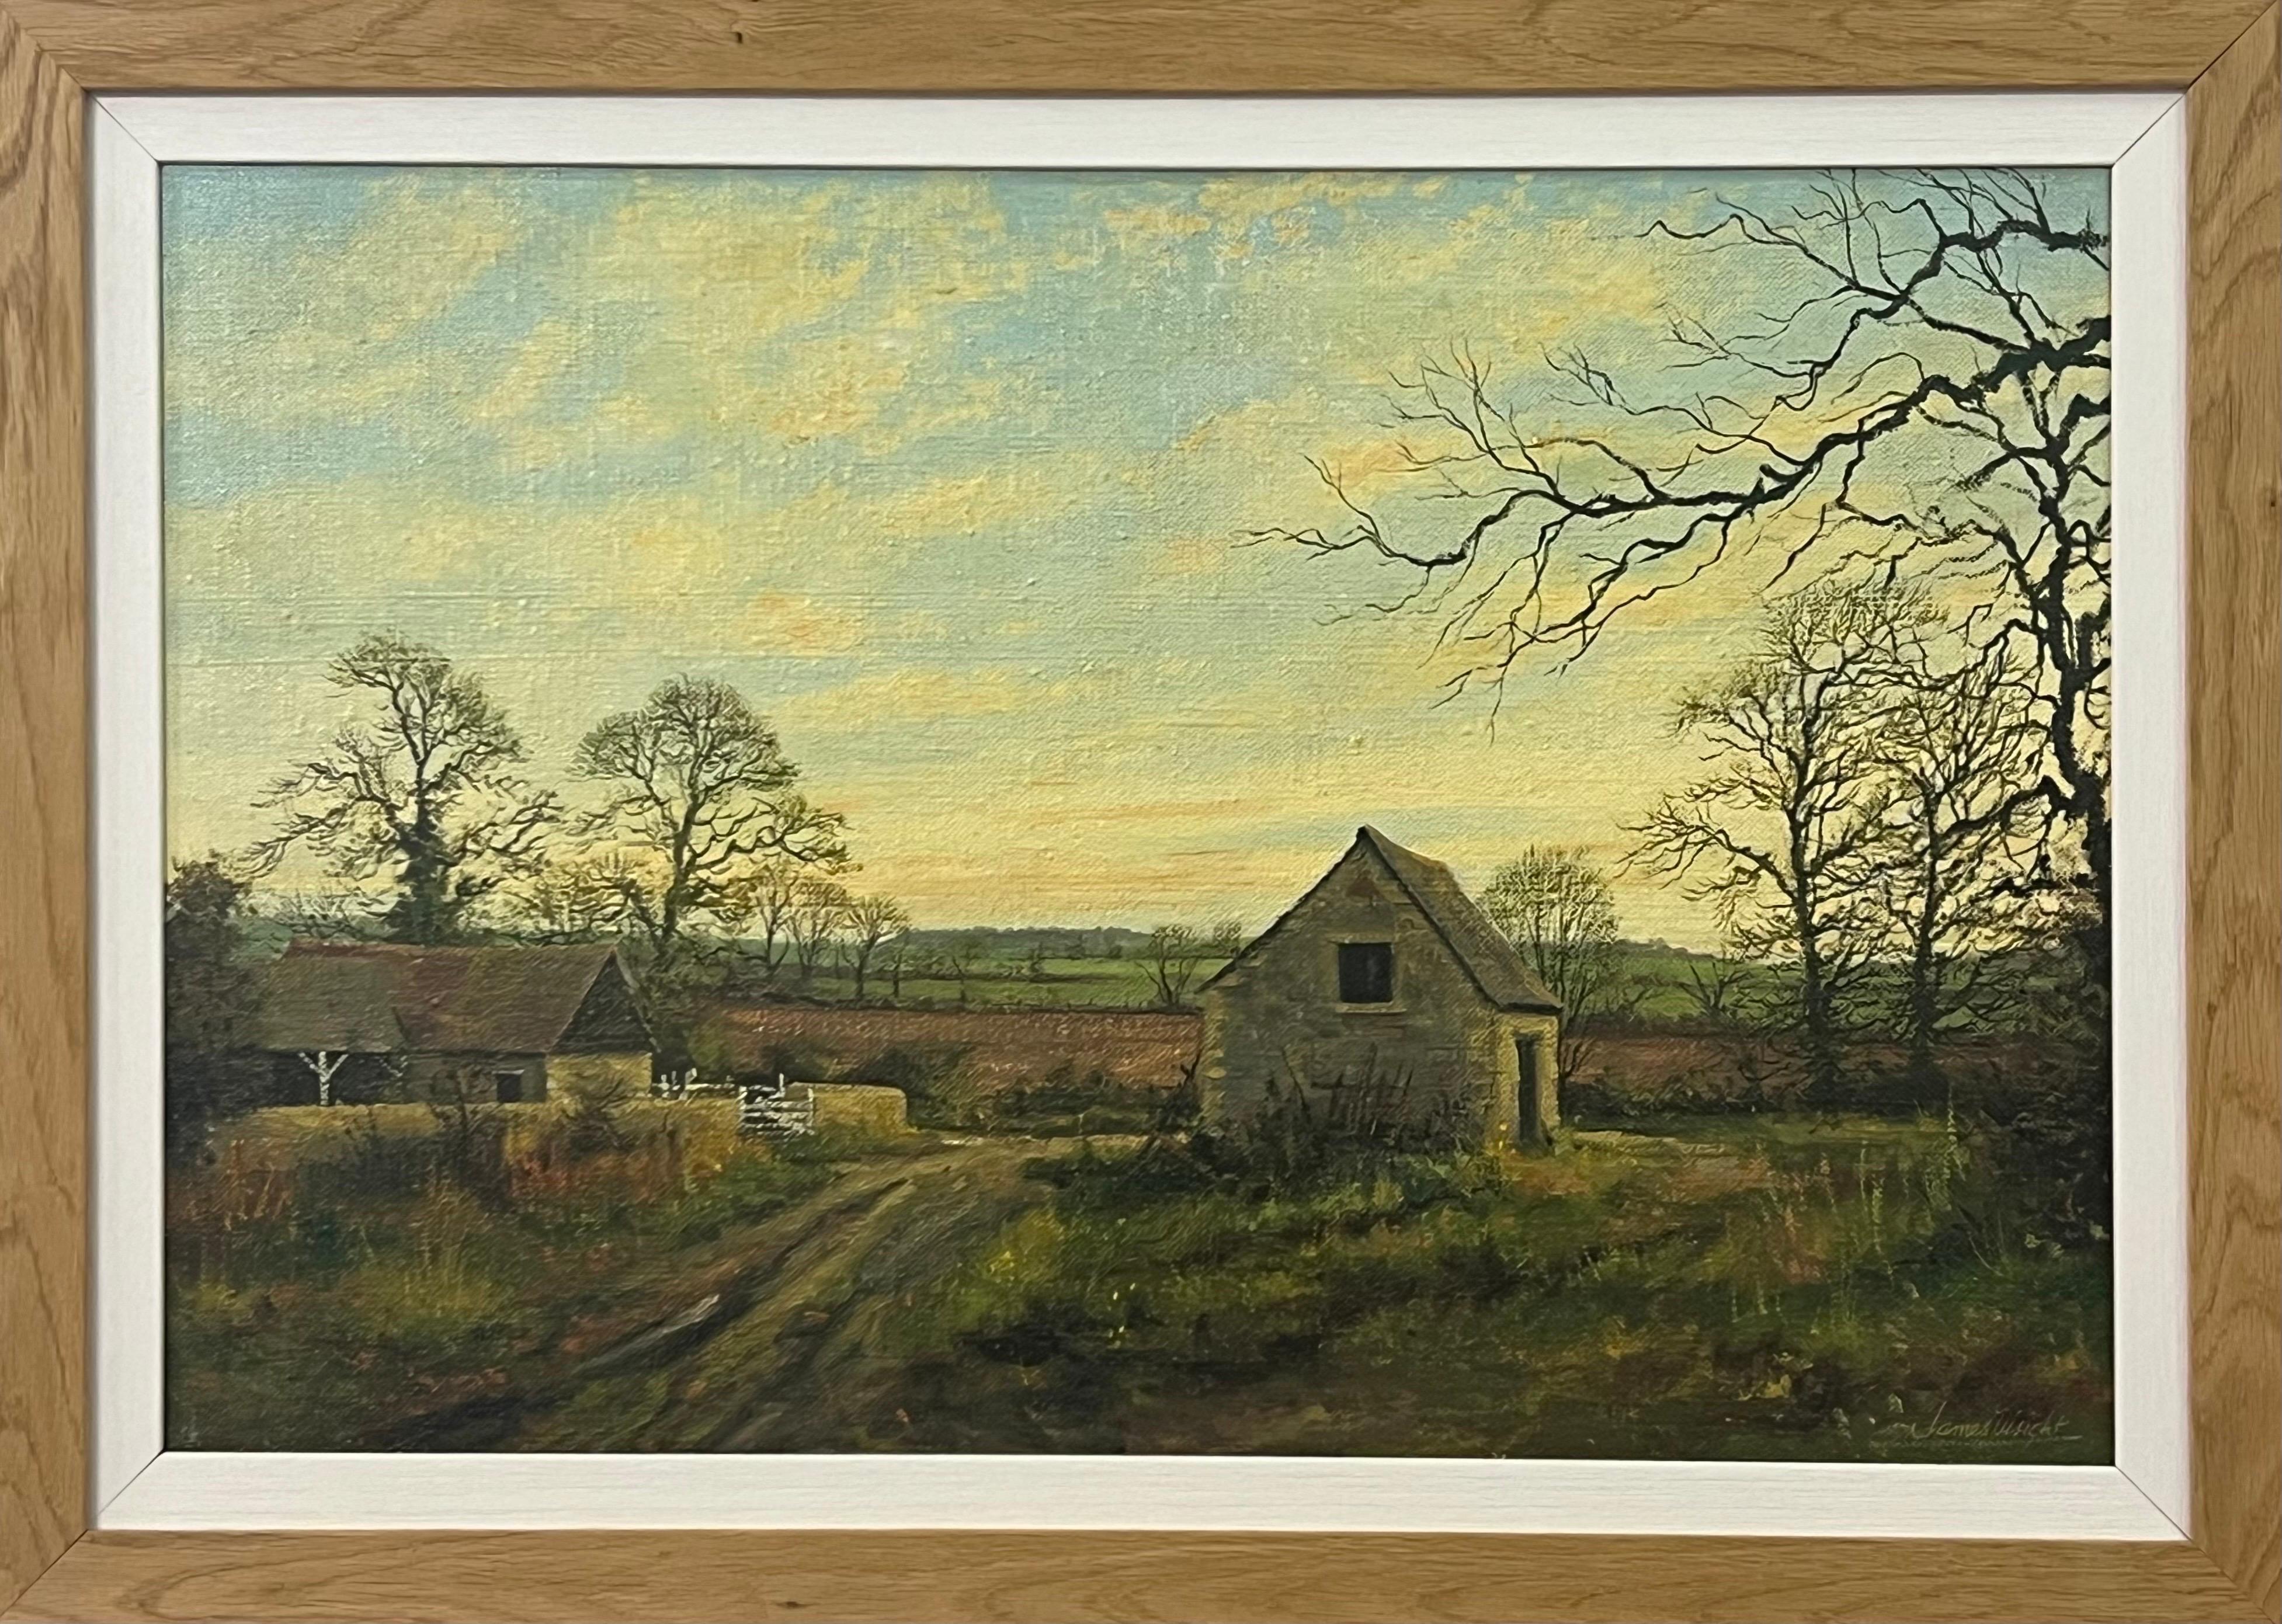 James Wright Figurative Painting – Old Barn Scene of a Farm in the English Countryside des britischen Landschaftskünstlers